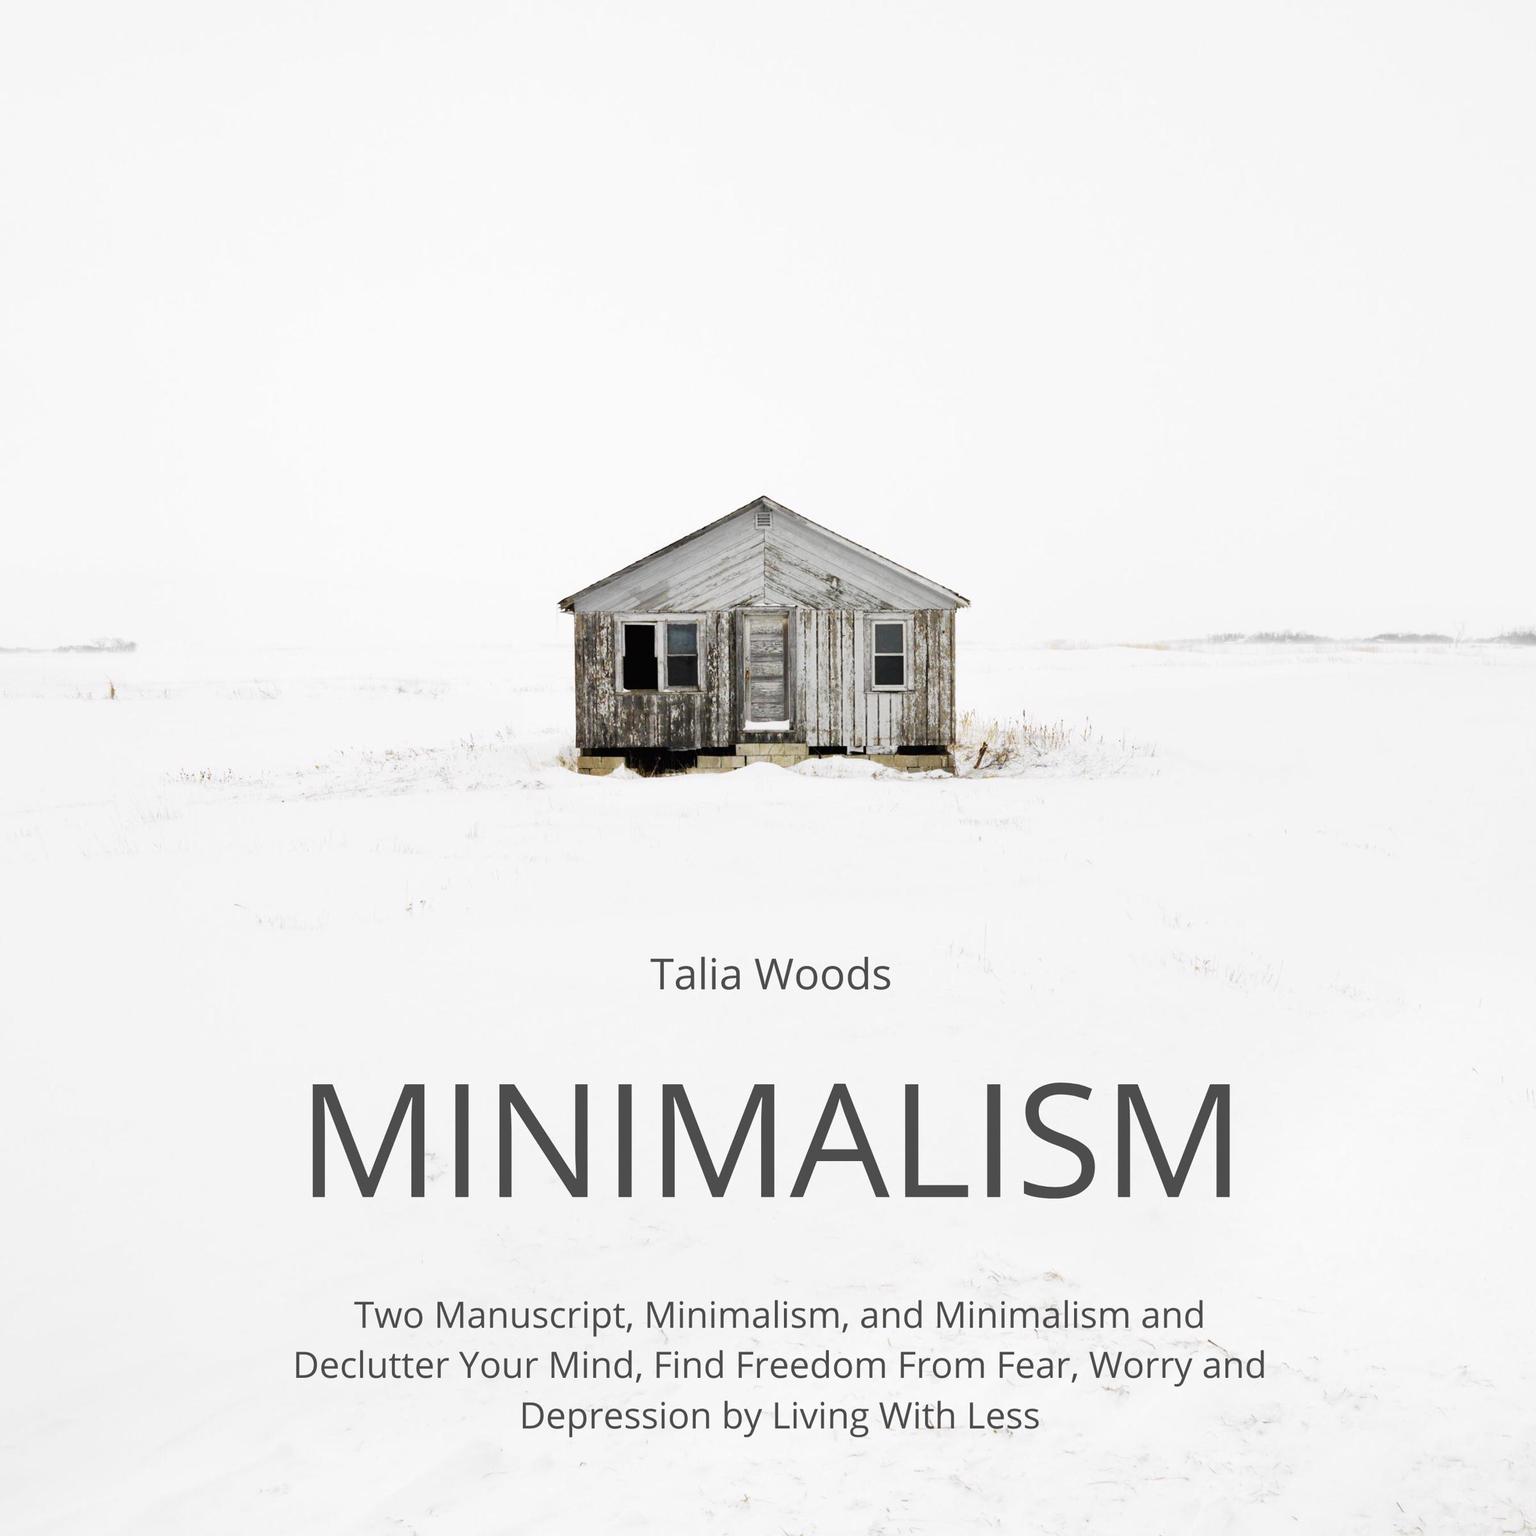 Minimalism: Two Manuscript, Minimalism, and Minimalism and Declutter Your Mind, Find Freedom From Fear, Worry and Depression by Living With Less Audiobook, by Talia Woods